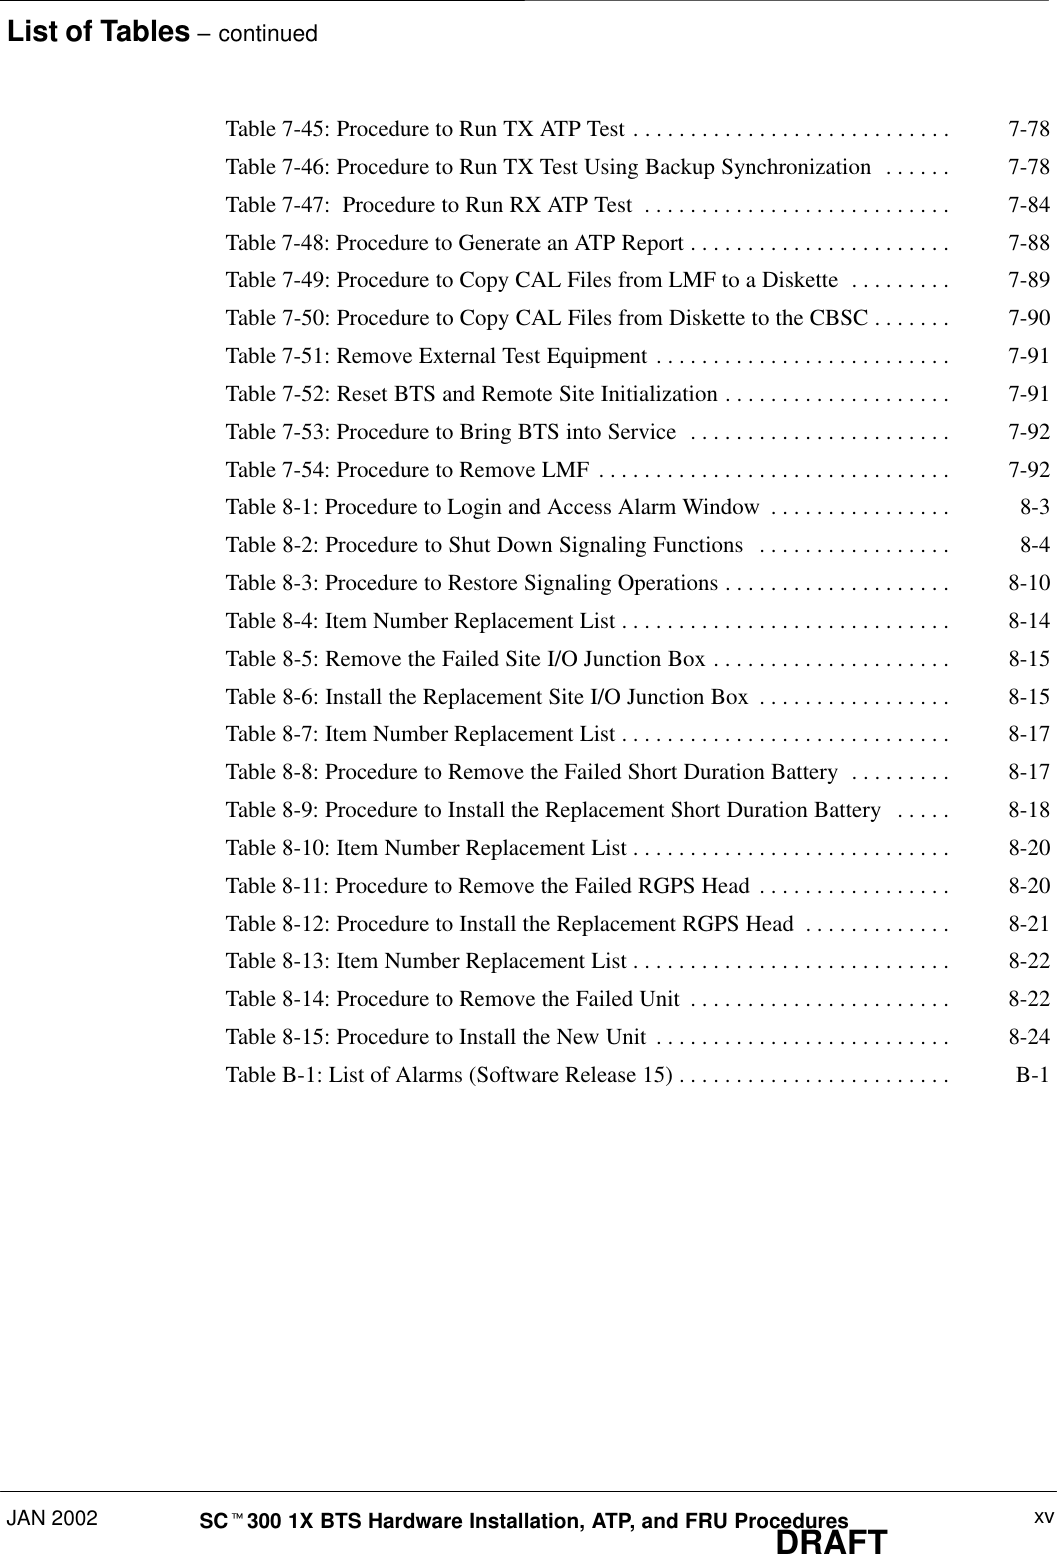 List of Tables – continuedJAN 2002 xvSCt300 1X BTS Hardware Installation, ATP, and FRU ProceduresDRAFTTable 7-45: Procedure to Run TX ATP Test 7-78. . . . . . . . . . . . . . . . . . . . . . . . . . . . Table 7-46: Procedure to Run TX Test Using Backup Synchronization 7-78. . . . . . Table 7-47:  Procedure to Run RX ATP Test 7-84. . . . . . . . . . . . . . . . . . . . . . . . . . . Table 7-48: Procedure to Generate an ATP Report 7-88. . . . . . . . . . . . . . . . . . . . . . . Table 7-49: Procedure to Copy CAL Files from LMF to a Diskette 7-89. . . . . . . . . Table 7-50: Procedure to Copy CAL Files from Diskette to the CBSC 7-90. . . . . . . Table 7-51: Remove External Test Equipment 7-91. . . . . . . . . . . . . . . . . . . . . . . . . . Table 7-52: Reset BTS and Remote Site Initialization 7-91. . . . . . . . . . . . . . . . . . . . Table 7-53: Procedure to Bring BTS into Service 7-92. . . . . . . . . . . . . . . . . . . . . . . Table 7-54: Procedure to Remove LMF 7-92. . . . . . . . . . . . . . . . . . . . . . . . . . . . . . . Table 8-1: Procedure to Login and Access Alarm Window 8-3. . . . . . . . . . . . . . . . Table 8-2: Procedure to Shut Down Signaling Functions 8-4. . . . . . . . . . . . . . . . . Table 8-3: Procedure to Restore Signaling Operations 8-10. . . . . . . . . . . . . . . . . . . . Table 8-4: Item Number Replacement List 8-14. . . . . . . . . . . . . . . . . . . . . . . . . . . . . Table 8-5: Remove the Failed Site I/O Junction Box 8-15. . . . . . . . . . . . . . . . . . . . . Table 8-6: Install the Replacement Site I/O Junction Box 8-15. . . . . . . . . . . . . . . . . Table 8-7: Item Number Replacement List 8-17. . . . . . . . . . . . . . . . . . . . . . . . . . . . . Table 8-8: Procedure to Remove the Failed Short Duration Battery 8-17. . . . . . . . . Table 8-9: Procedure to Install the Replacement Short Duration Battery 8-18. . . . . Table 8-10: Item Number Replacement List 8-20. . . . . . . . . . . . . . . . . . . . . . . . . . . . Table 8-11: Procedure to Remove the Failed RGPS Head 8-20. . . . . . . . . . . . . . . . . Table 8-12: Procedure to Install the Replacement RGPS Head 8-21. . . . . . . . . . . . . Table 8-13: Item Number Replacement List 8-22. . . . . . . . . . . . . . . . . . . . . . . . . . . . Table 8-14: Procedure to Remove the Failed Unit 8-22. . . . . . . . . . . . . . . . . . . . . . . Table 8-15: Procedure to Install the New Unit 8-24. . . . . . . . . . . . . . . . . . . . . . . . . . Table B-1: List of Alarms (Software Release 15) B-1. . . . . . . . . . . . . . . . . . . . . . . . 